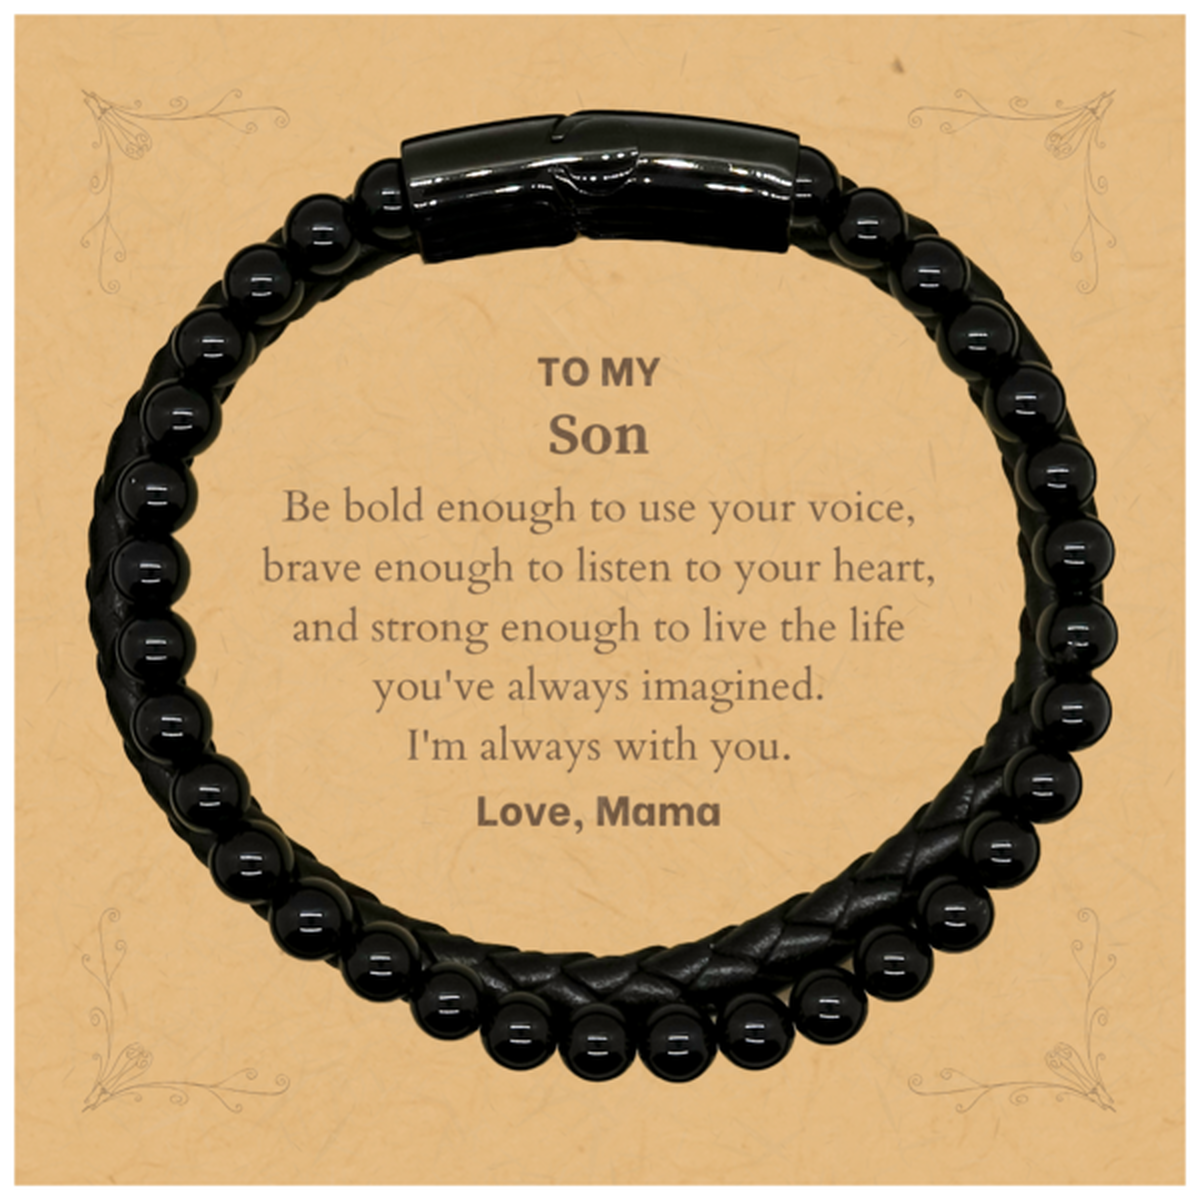 Keepsake Son Stone Leather Bracelets Gift Idea Graduation Christmas Birthday Son from Mama, Son Be bold enough to use your voice, brave enough to listen to your heart. Love, Mama